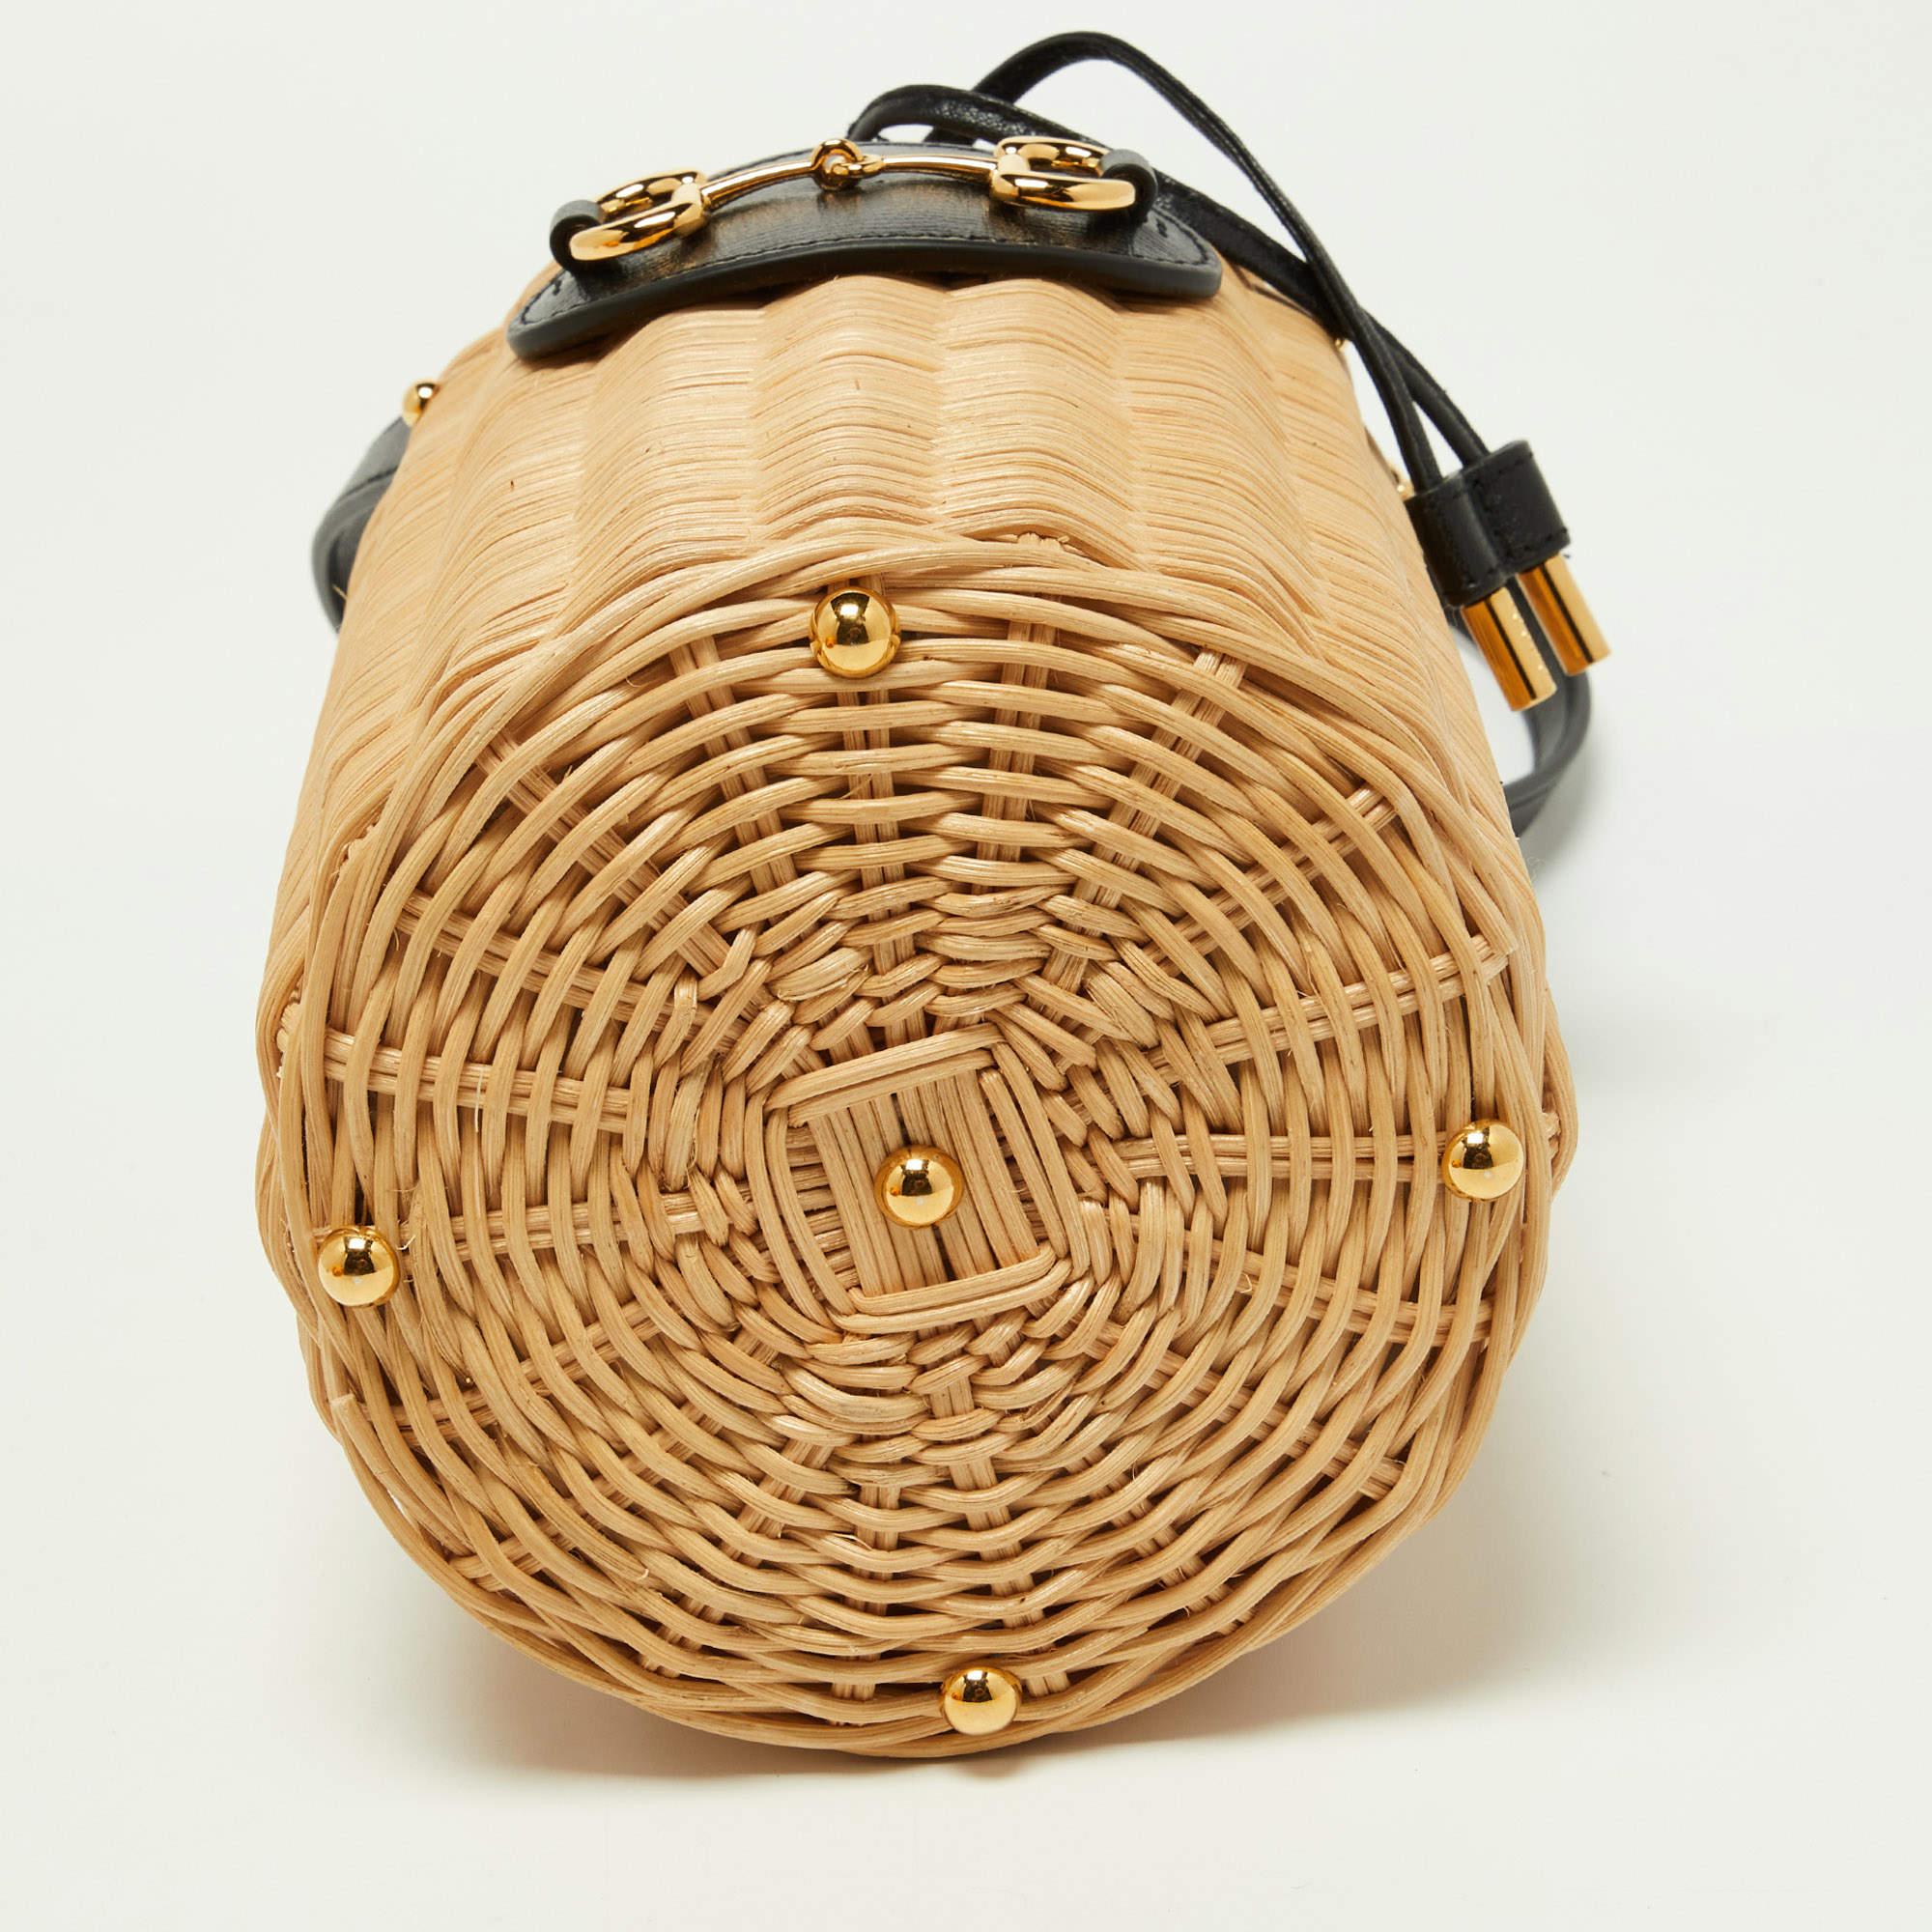 Gucci Beige/Black Wicker and Leather Horsebit 1955 Bucket Bag For Sale 6